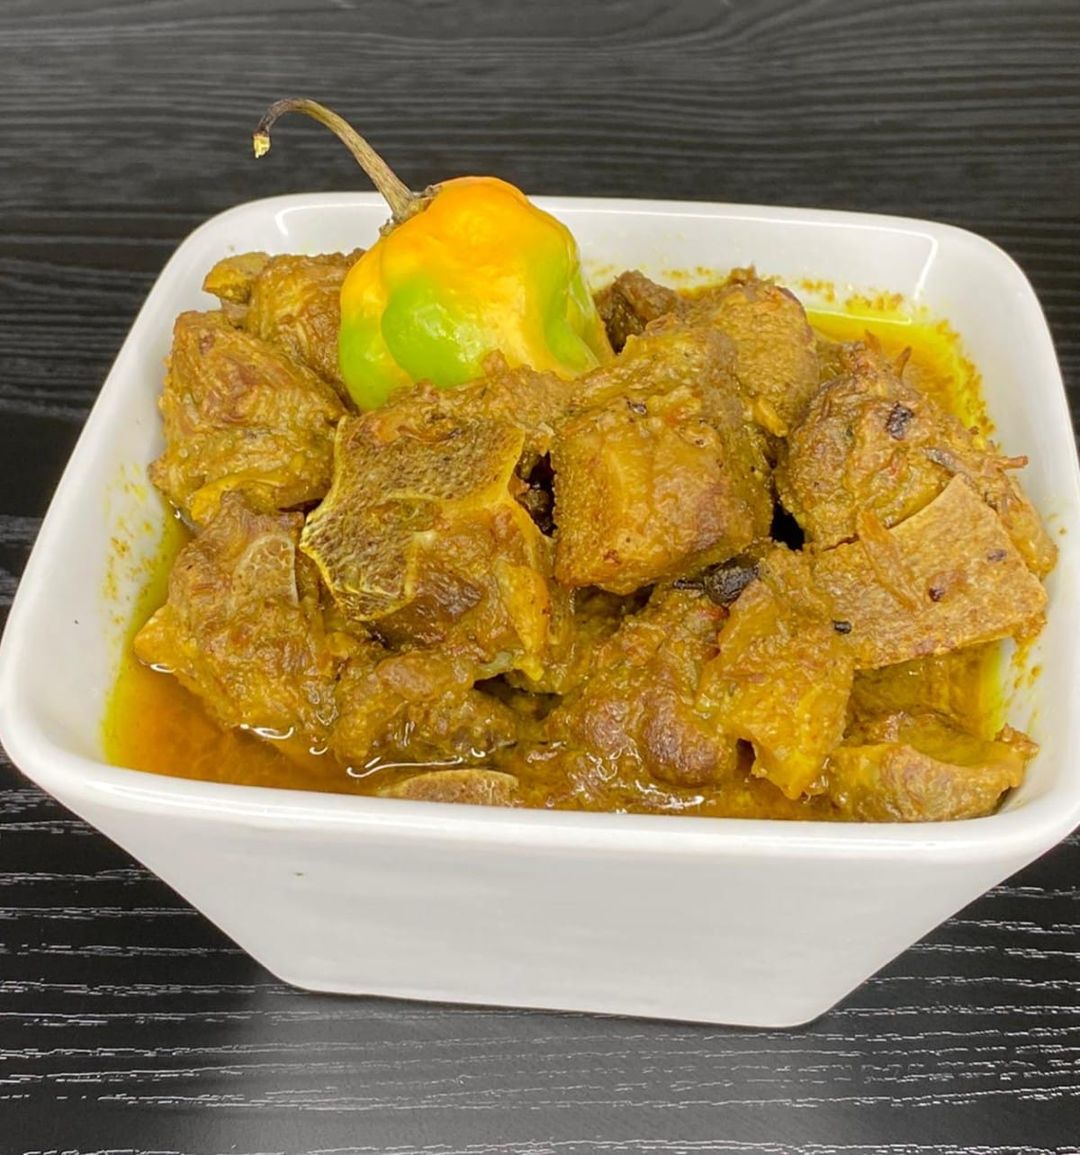 New Jamaican Restaurant Opens in Sarnia Ontario - Curry Goat